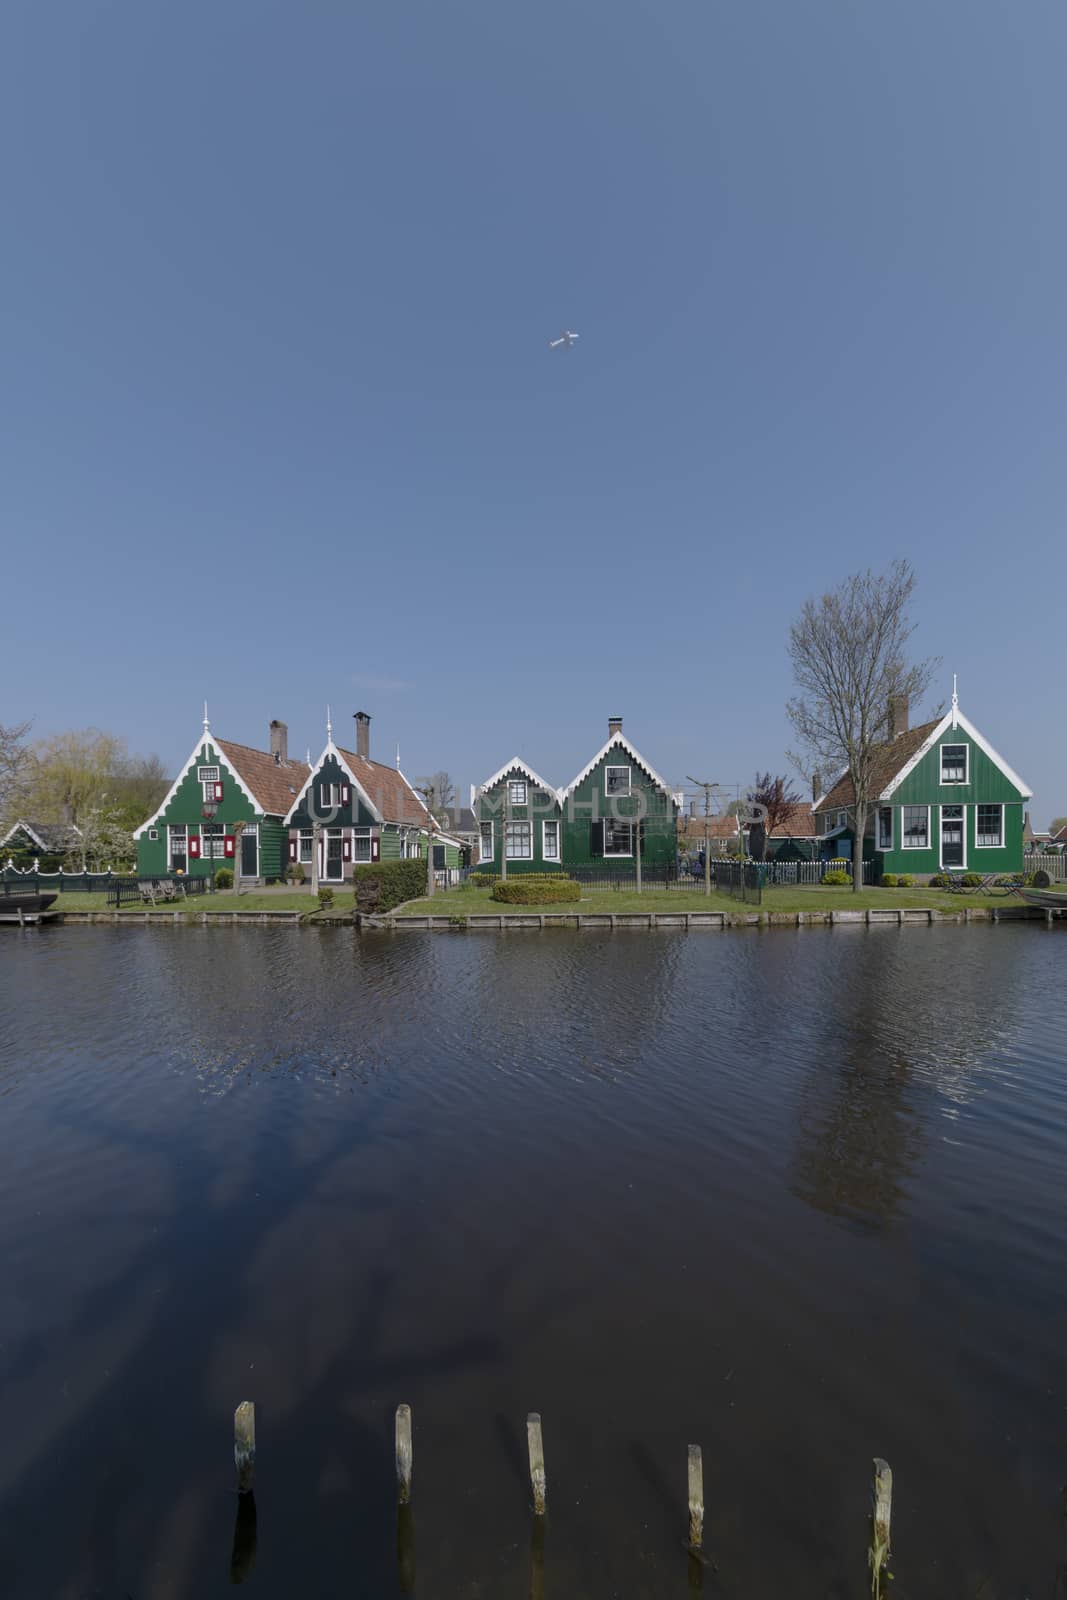 Plane flying above the Dutch green rural houses at the edge of the canals in the clear blue sunny sky by ankorlight